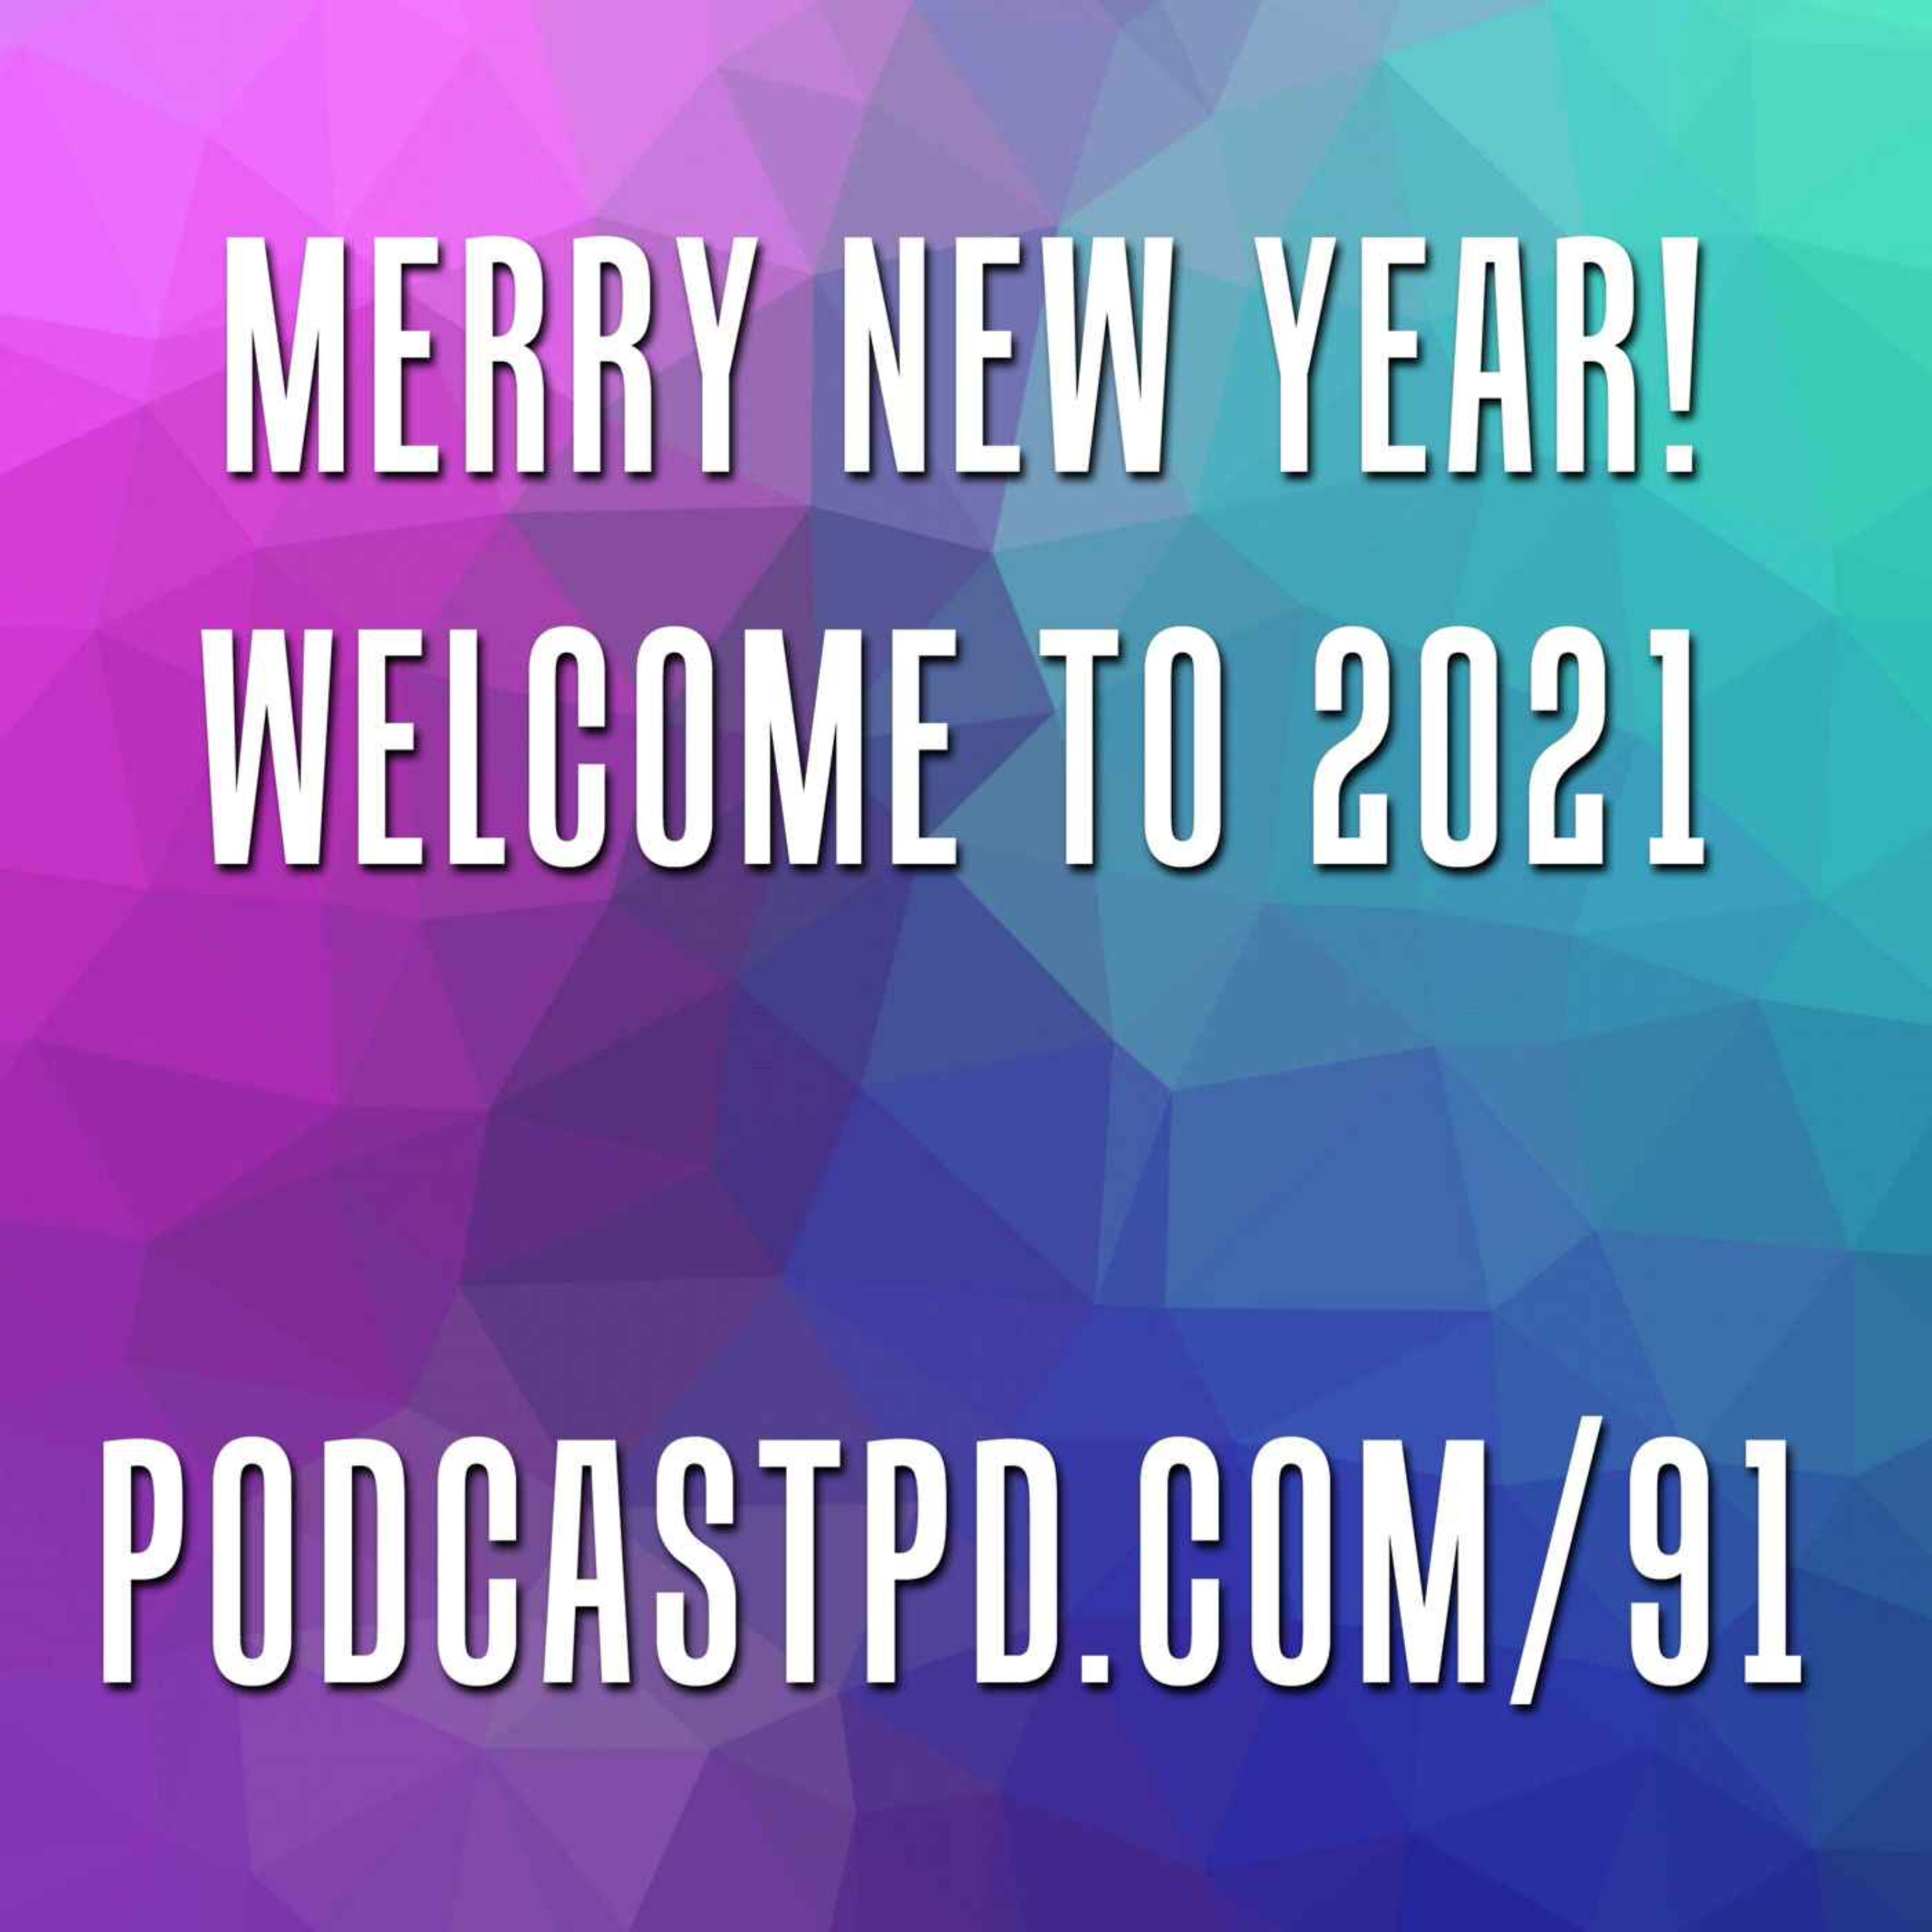 Merry New Year! Welcome to 2021 - PPD091 Image